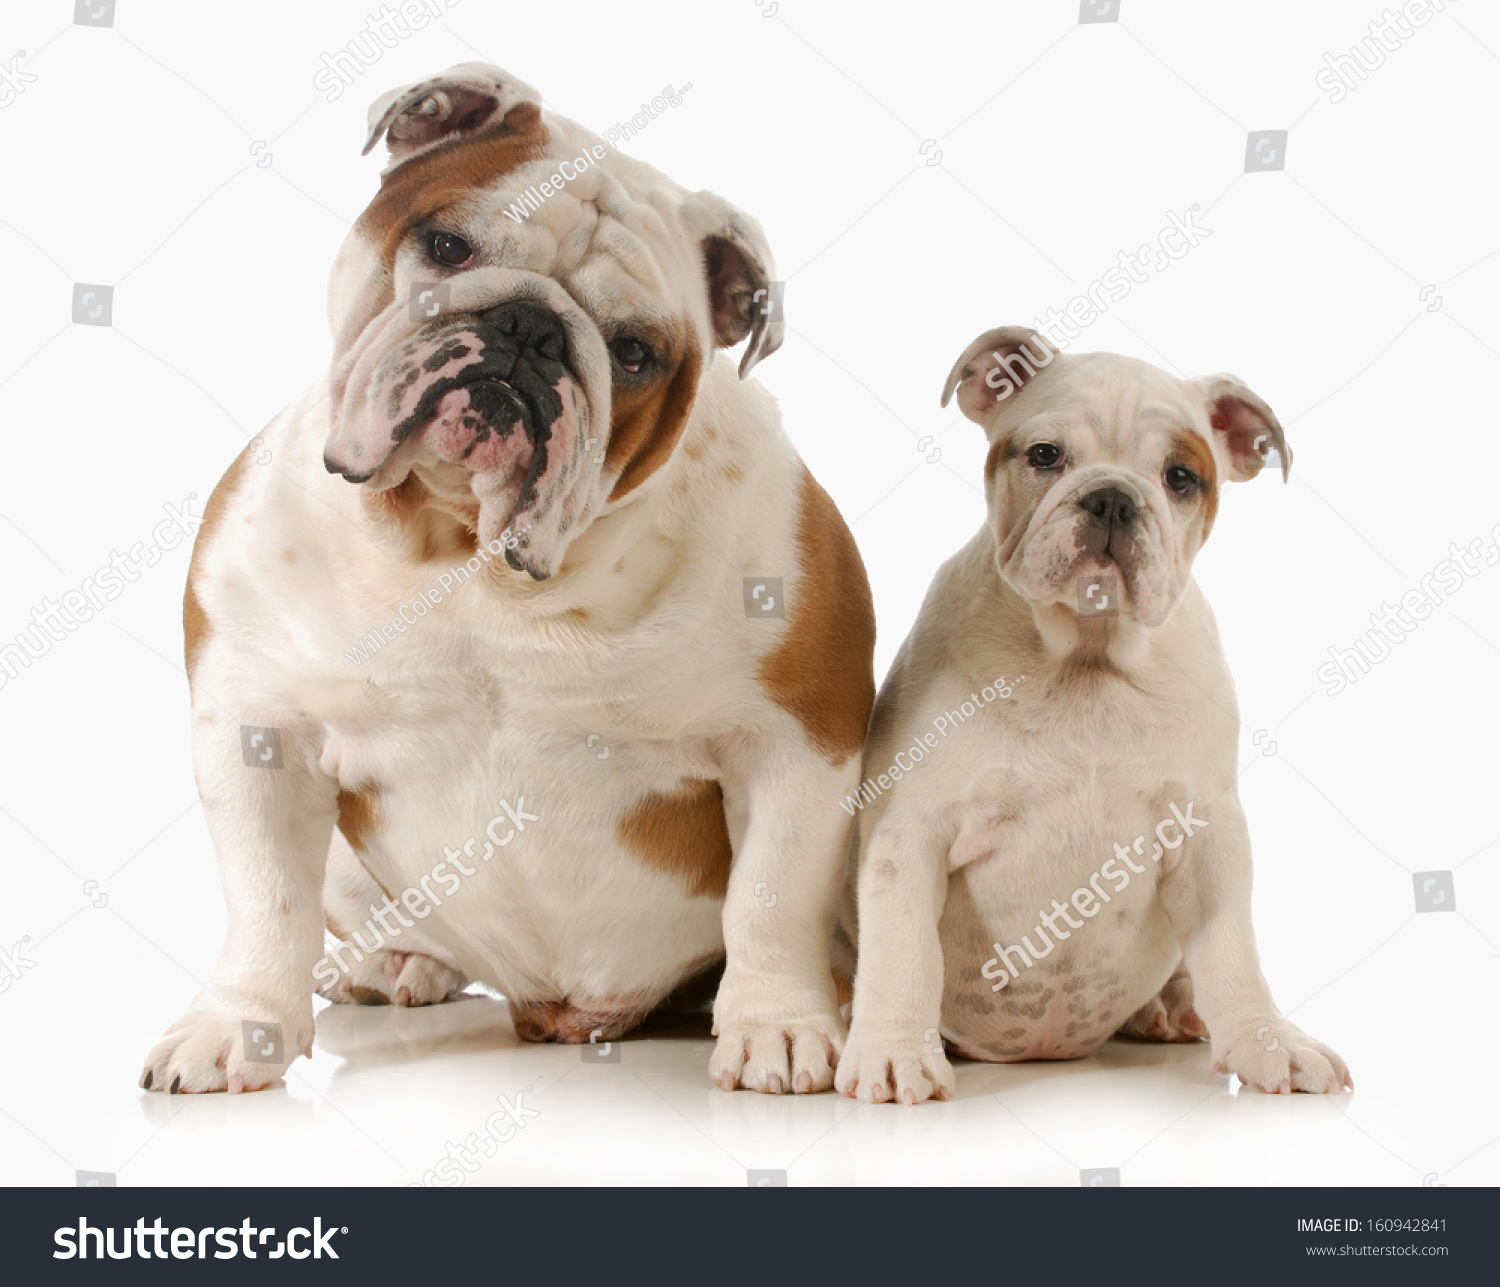 can you breed father and daughter dogs